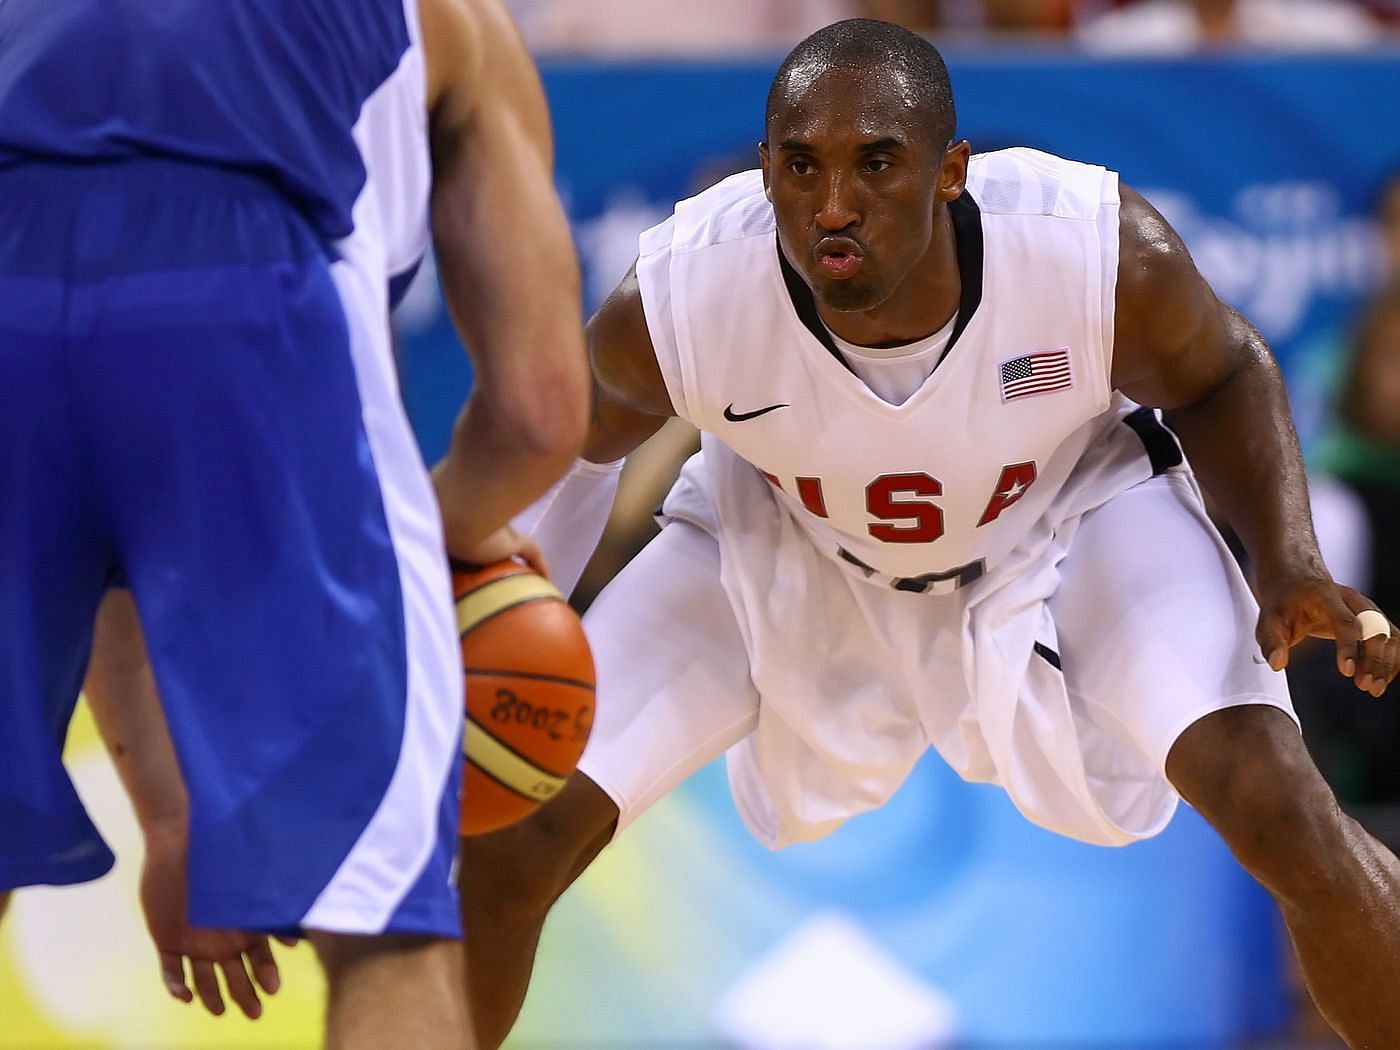 NBA legend Kobe Bryant during his time with Team USA